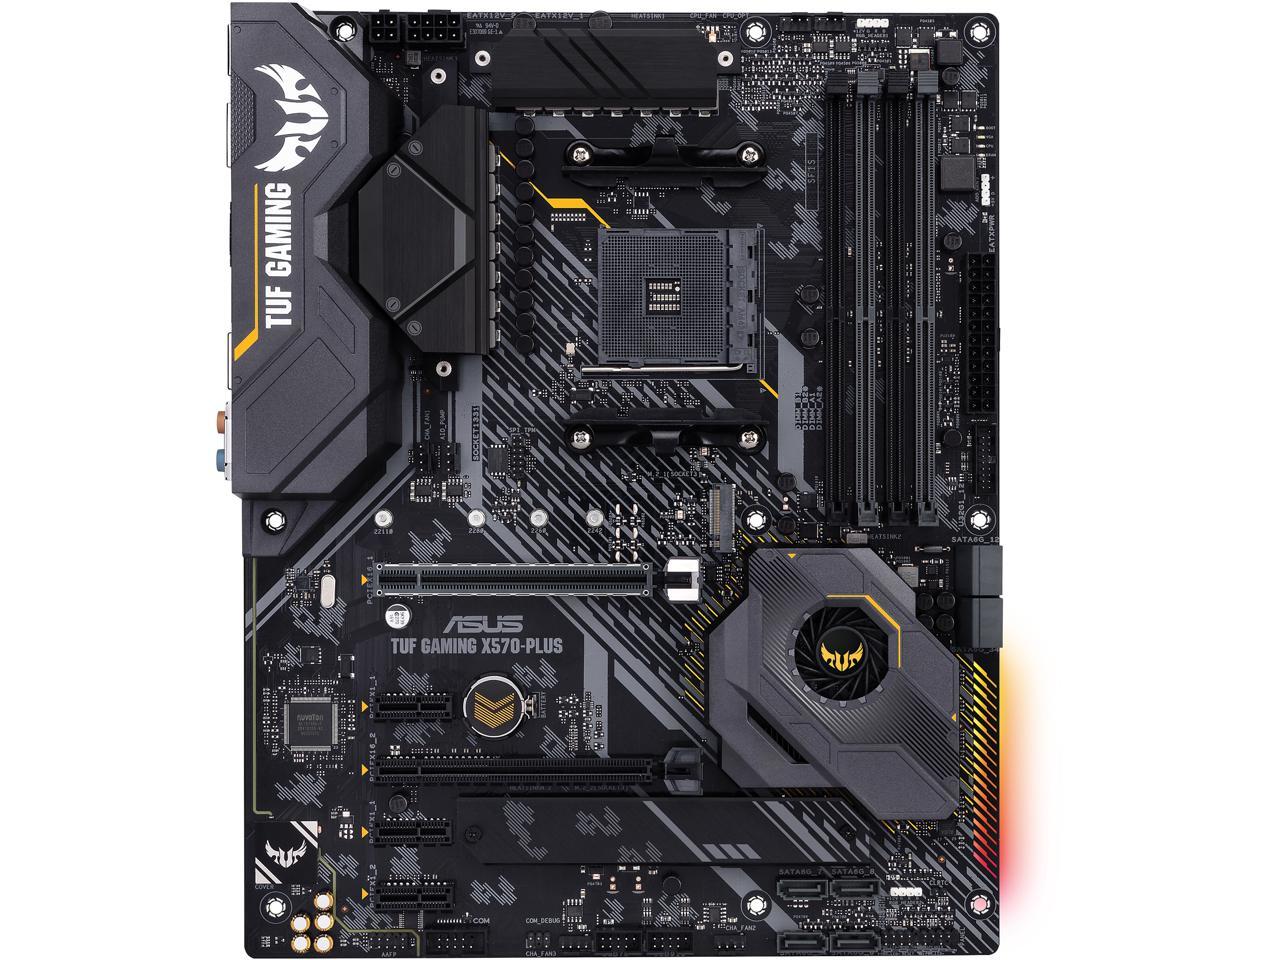 Asus Am4 Tuf Gaming X570-Plus Atx Motherboard With Pcie 4.0, Dual M.2, 12+2 With Dr. Mos Power